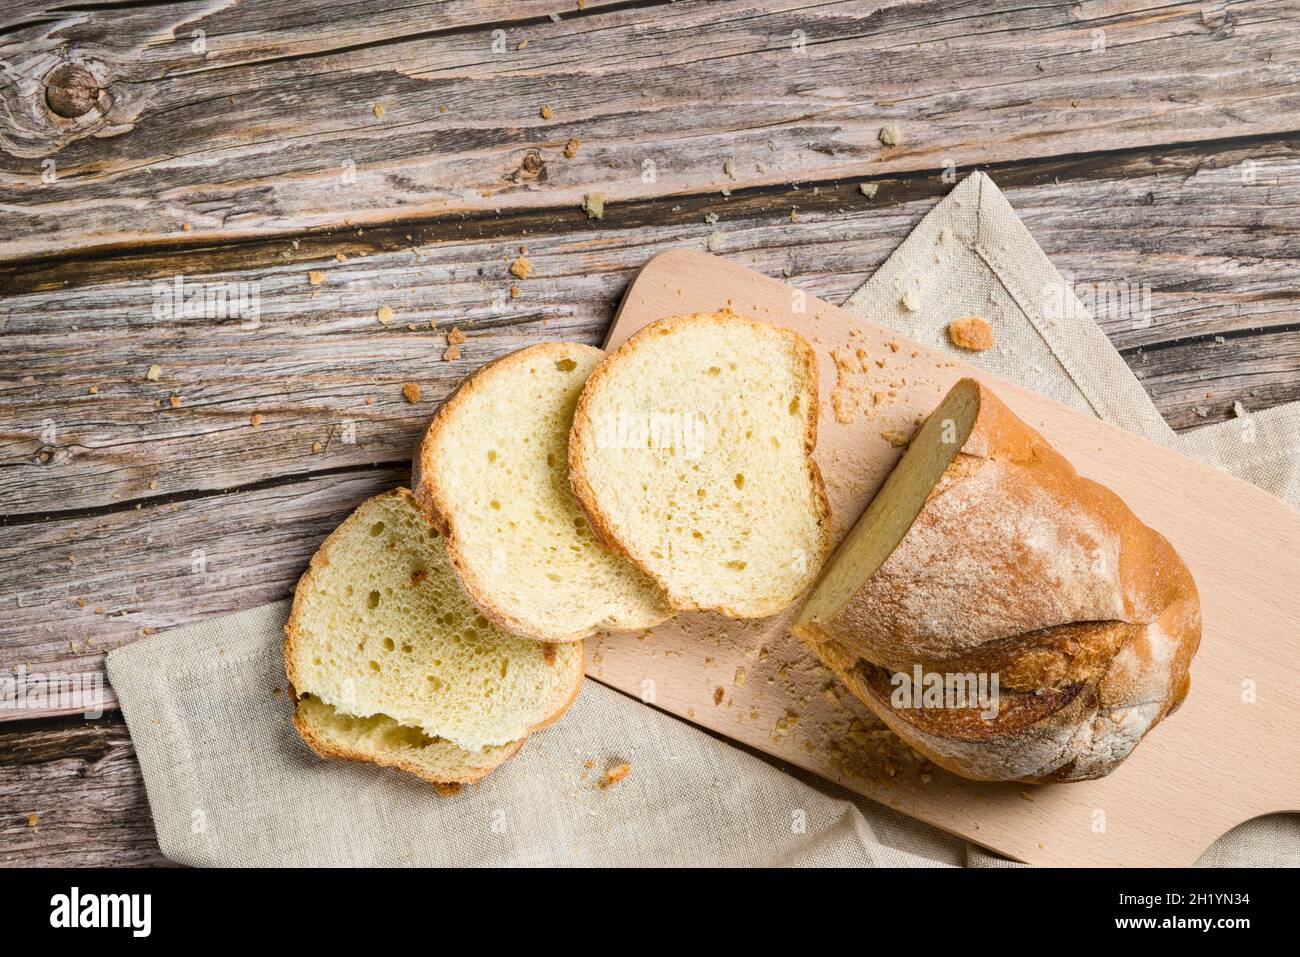 Sliced fresh bread and crumbs on wooden table. Top view Stock Photo